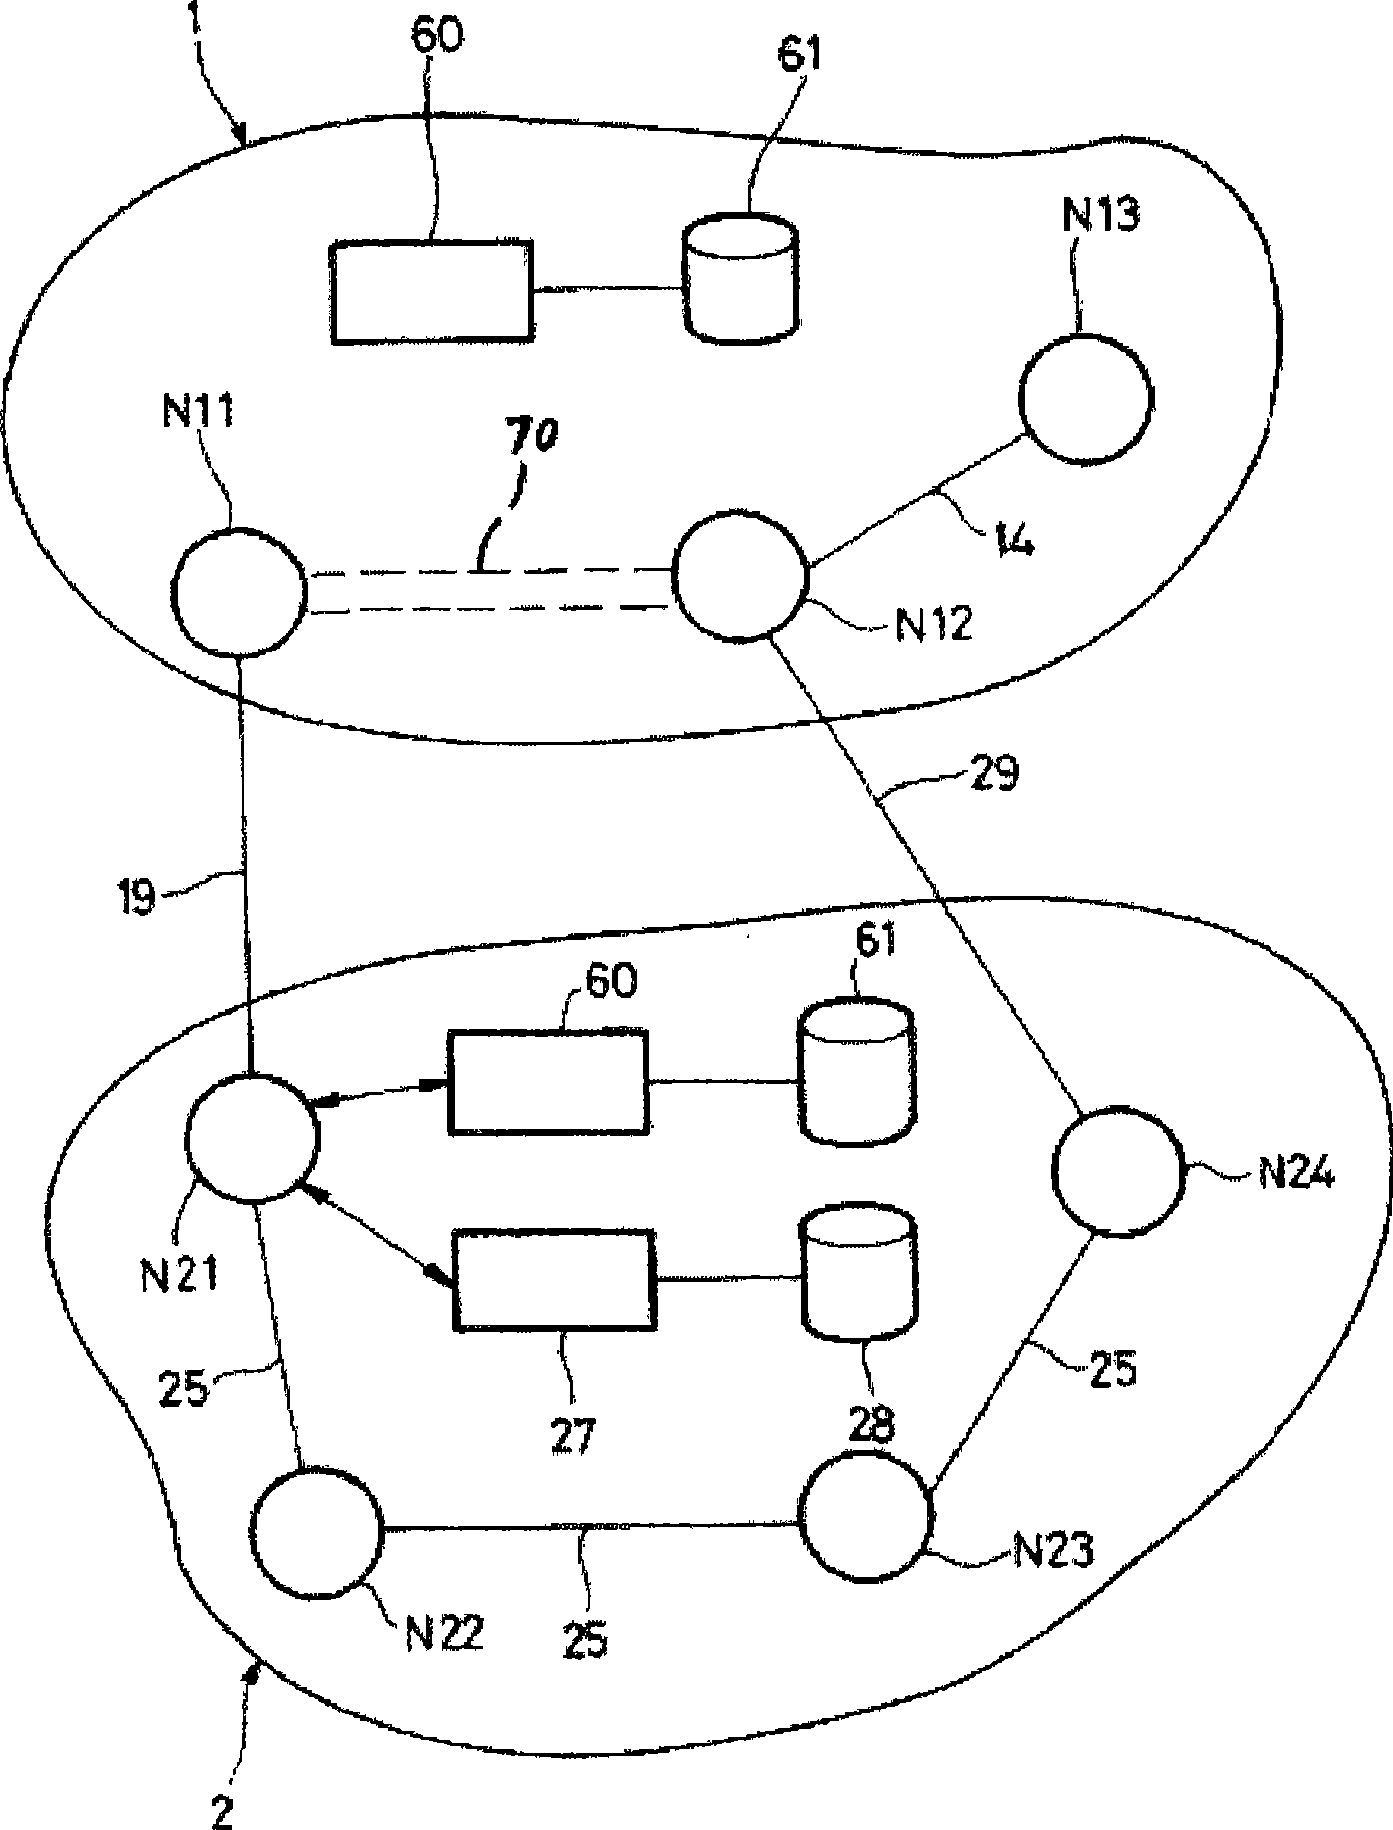 Communication of a risk information in a multi-domain network